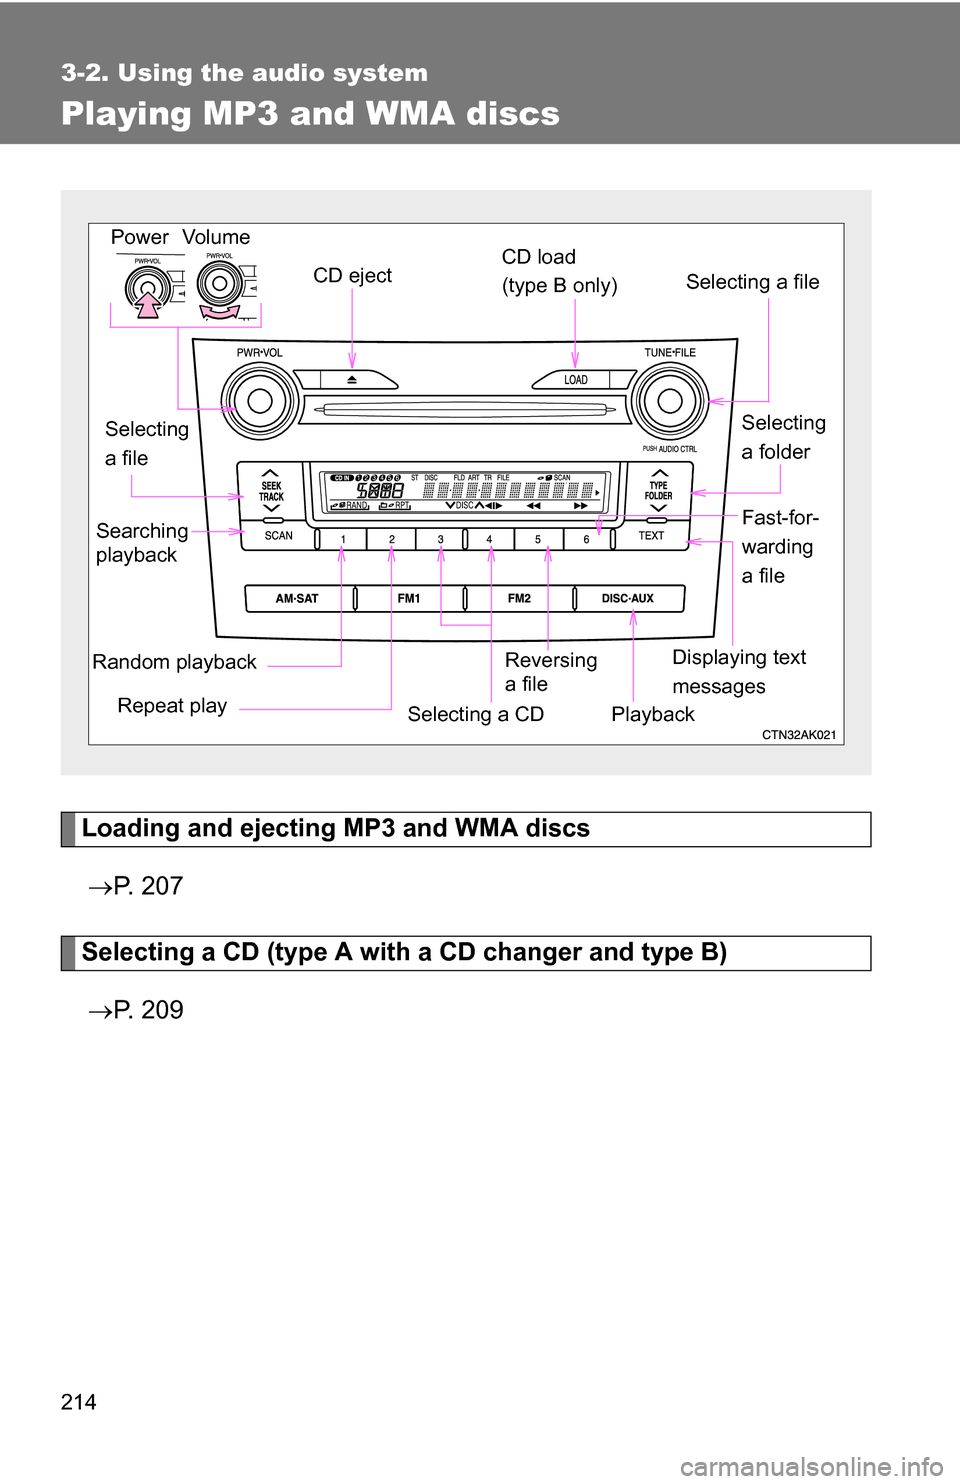 TOYOTA COROLLA 2009 10.G Owners Manual 214
3-2. Using the audio system
Playing MP3 and WMA discs
Loading and ejecting MP3 and WMA discs P.  2 0 7
Selecting a CD (type A with  a CD changer and type B)
 P.  2 0 9
Vol um e
Random playba